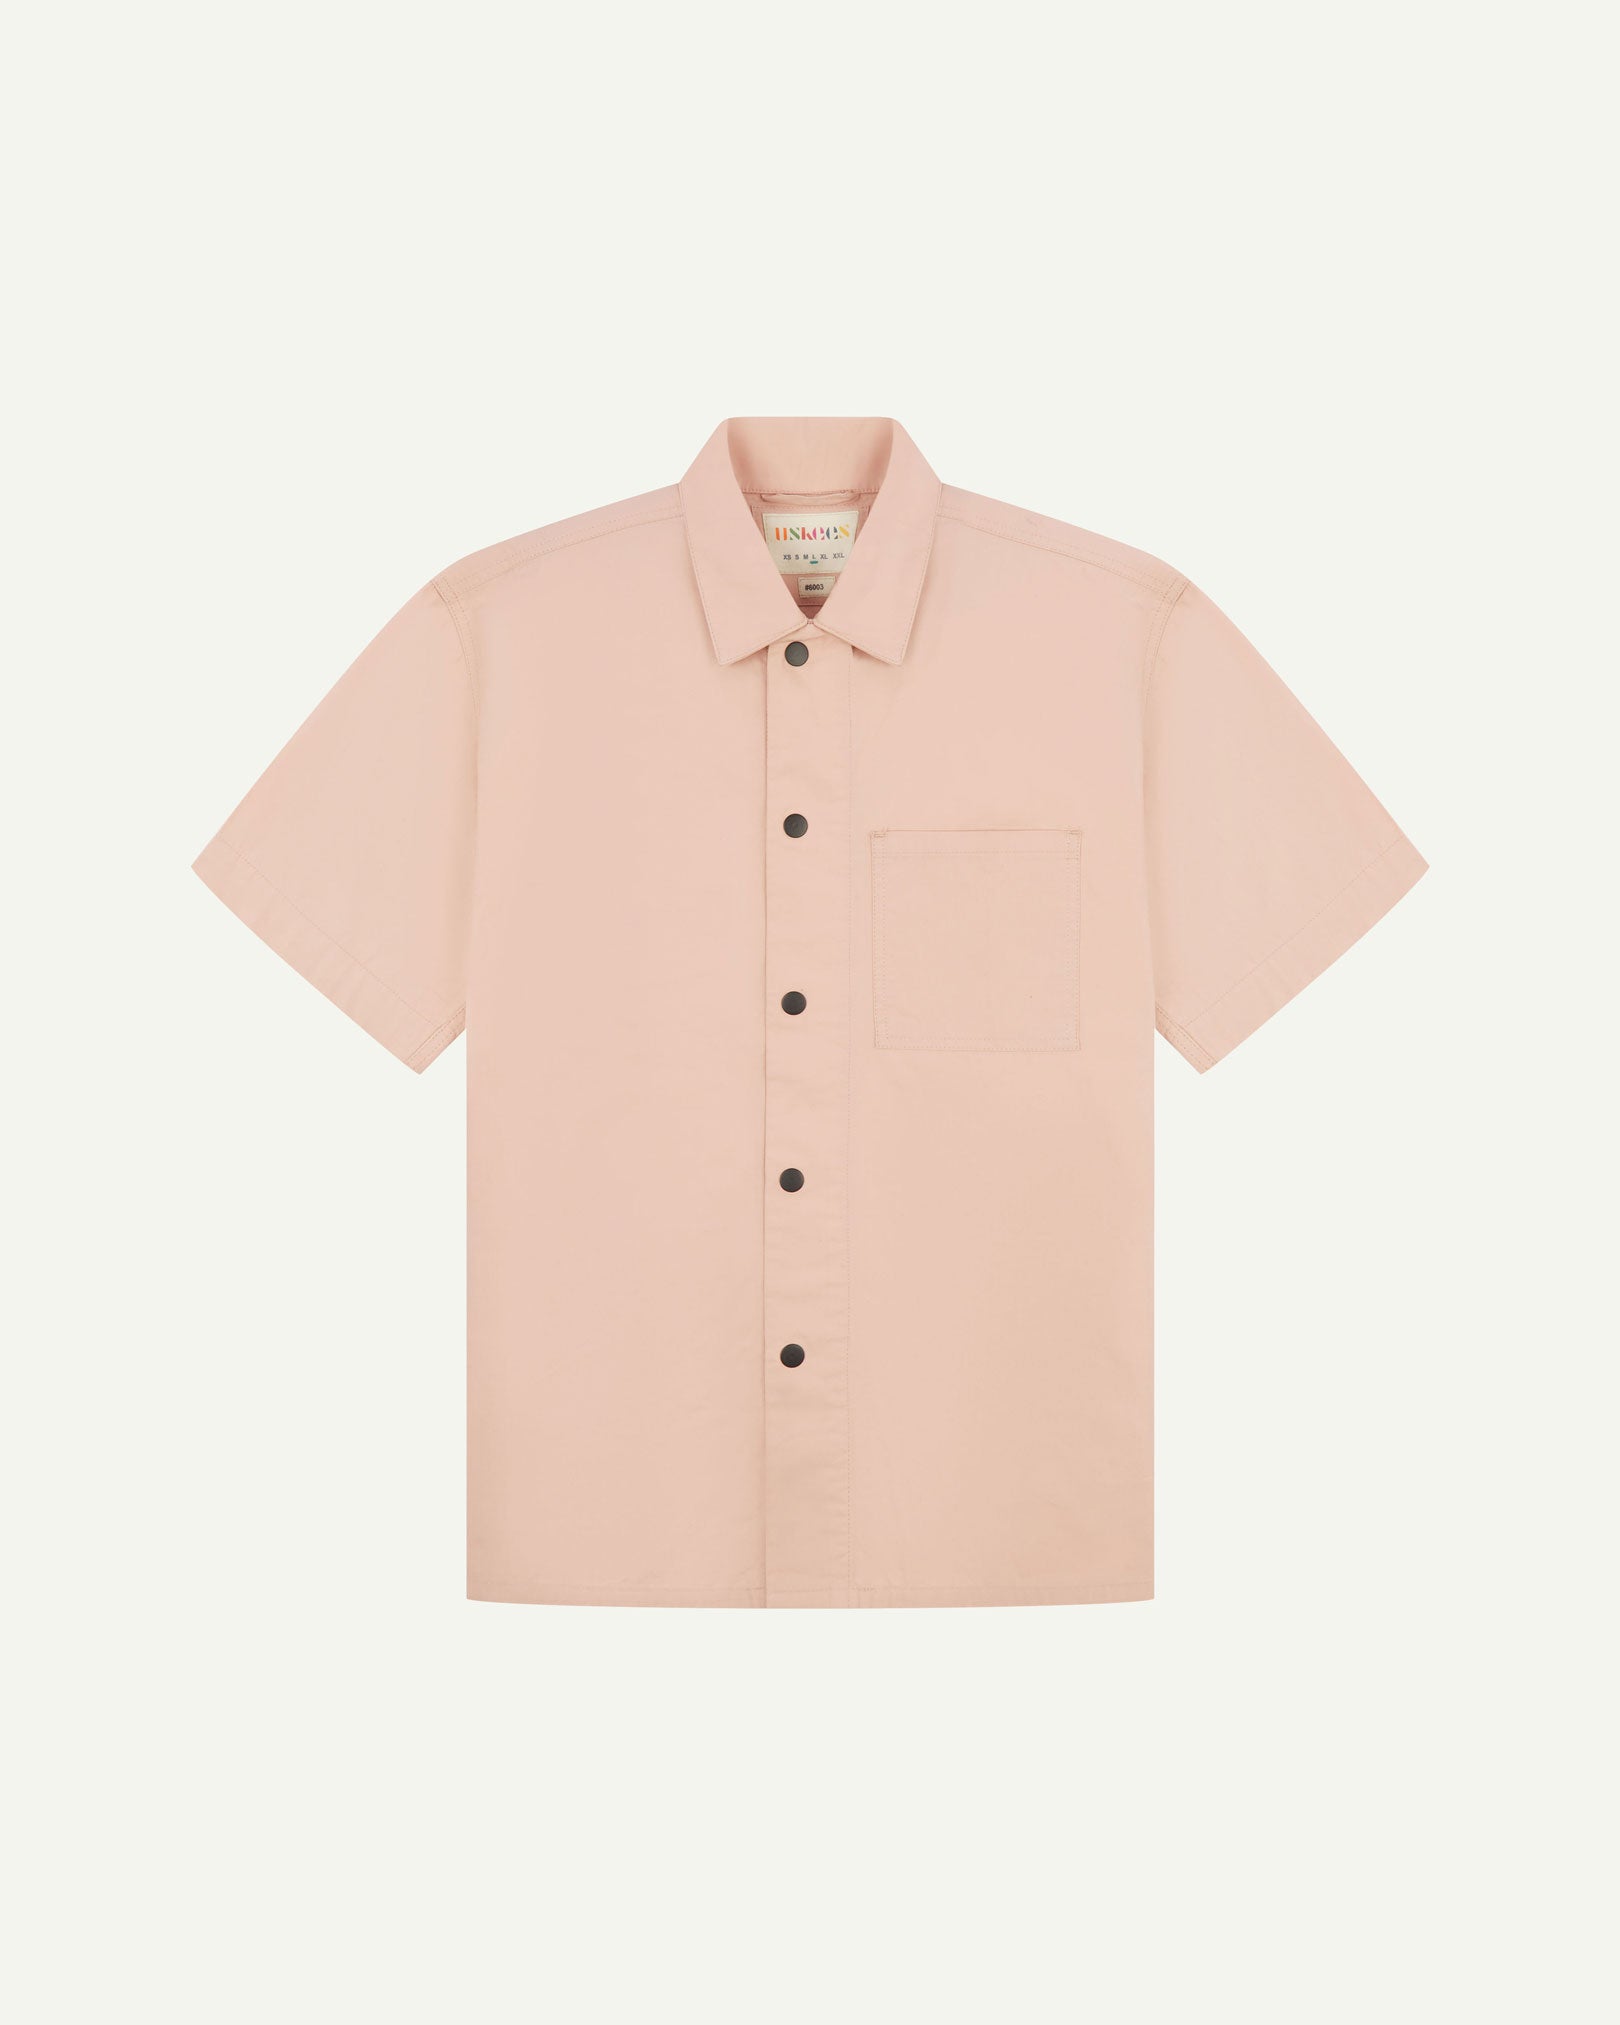 Front flat view of dusty pink buttoned organic cotton lightweight short sleeve shirt from Uskees.